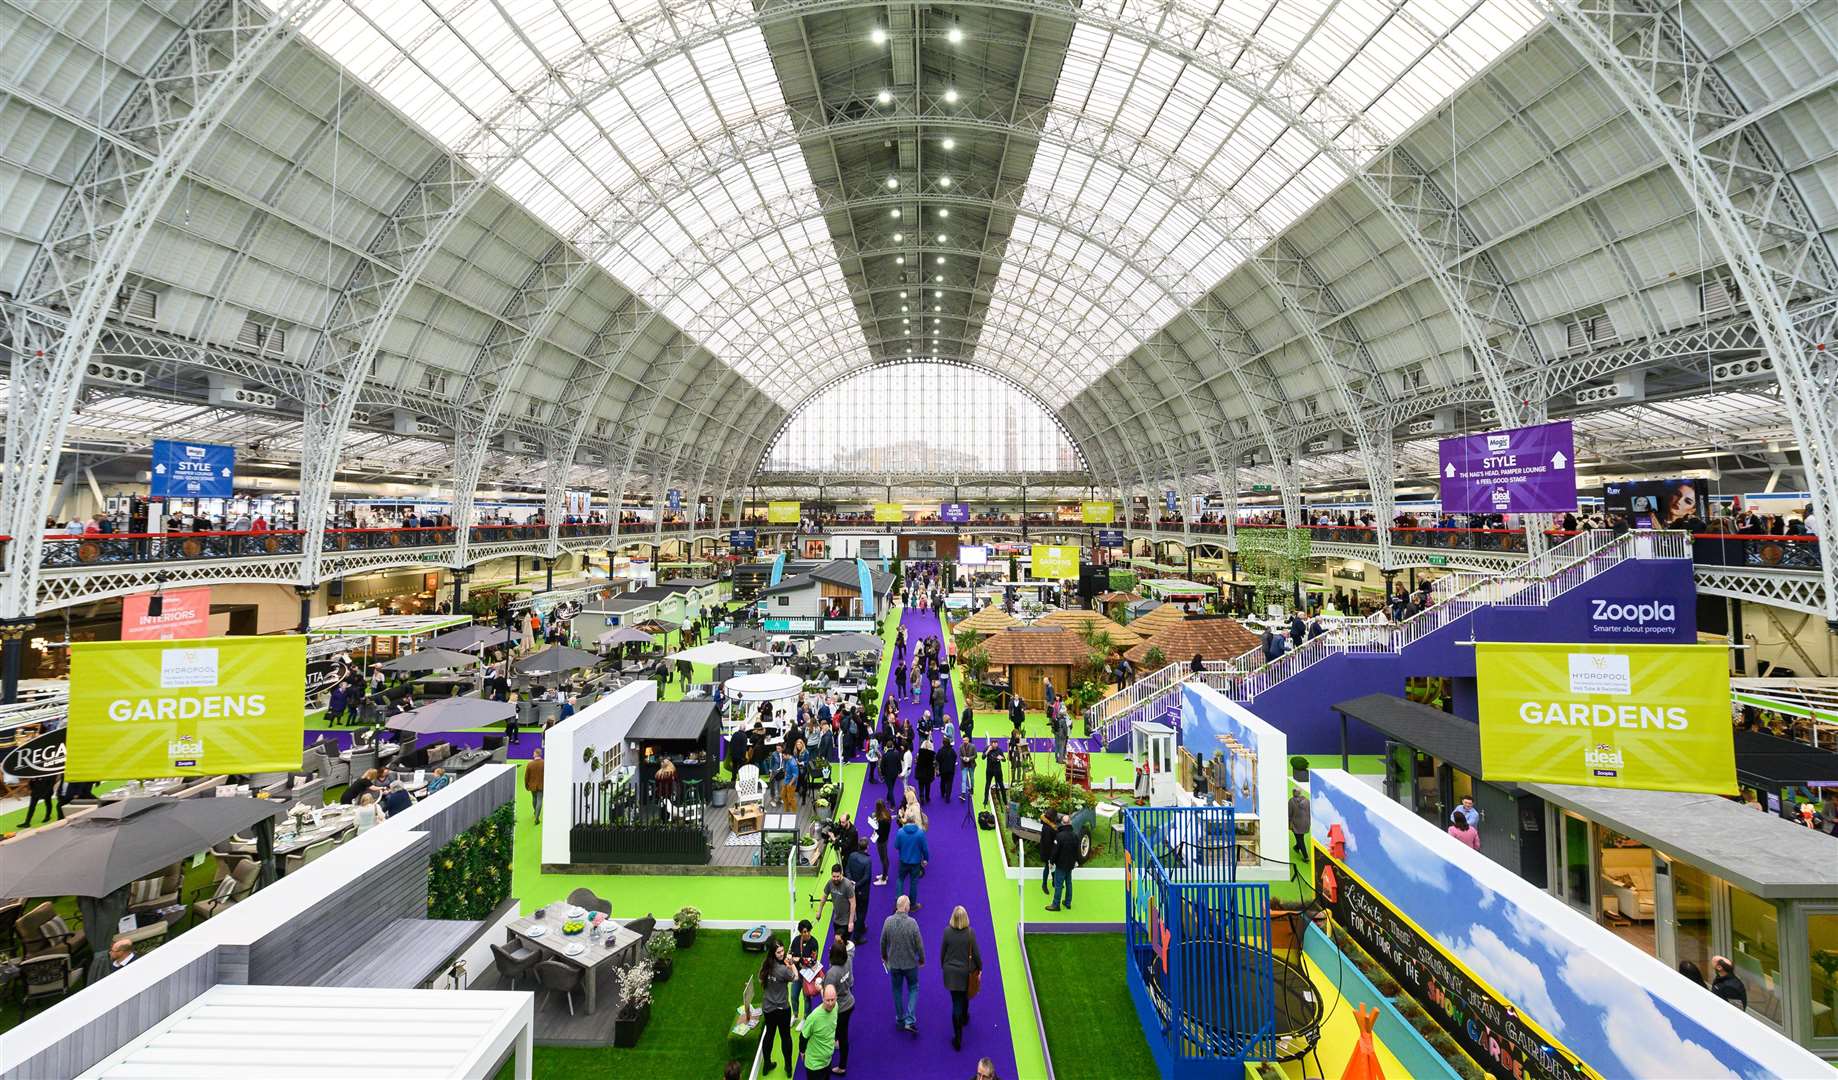 You can win tickets to the Ideal Home Show in Olympia